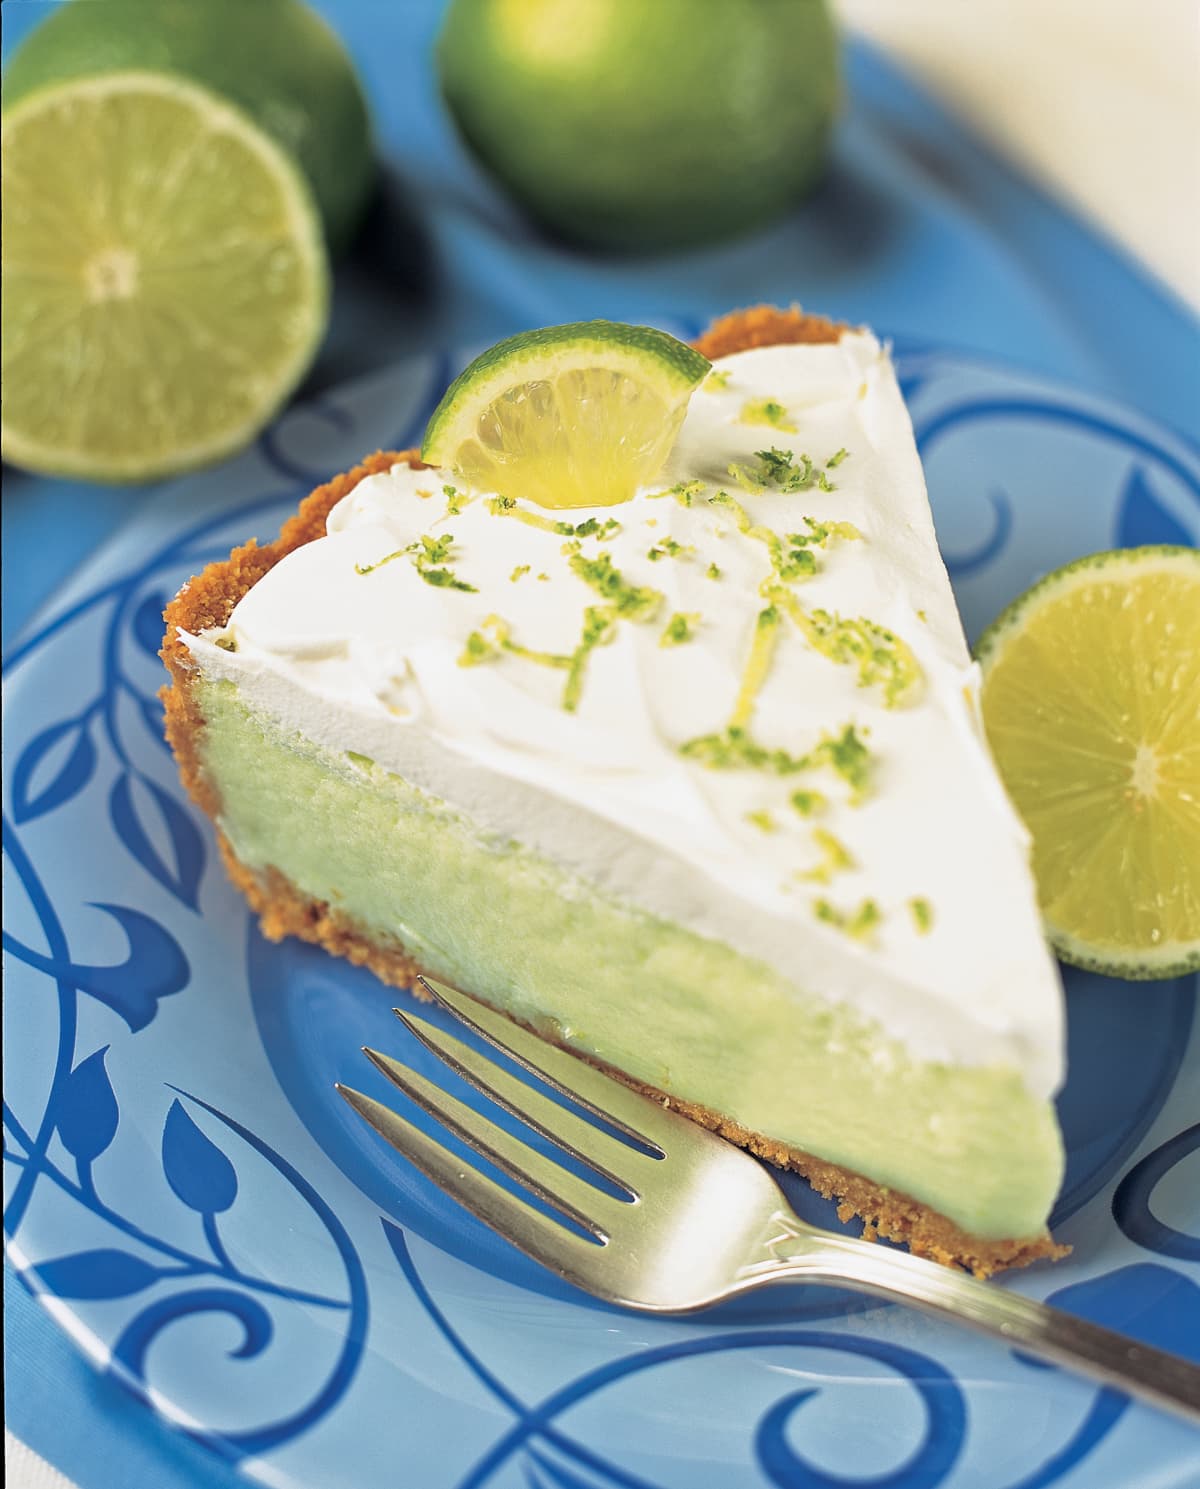 Key lime pie on a blue plate with fork and lime garnish